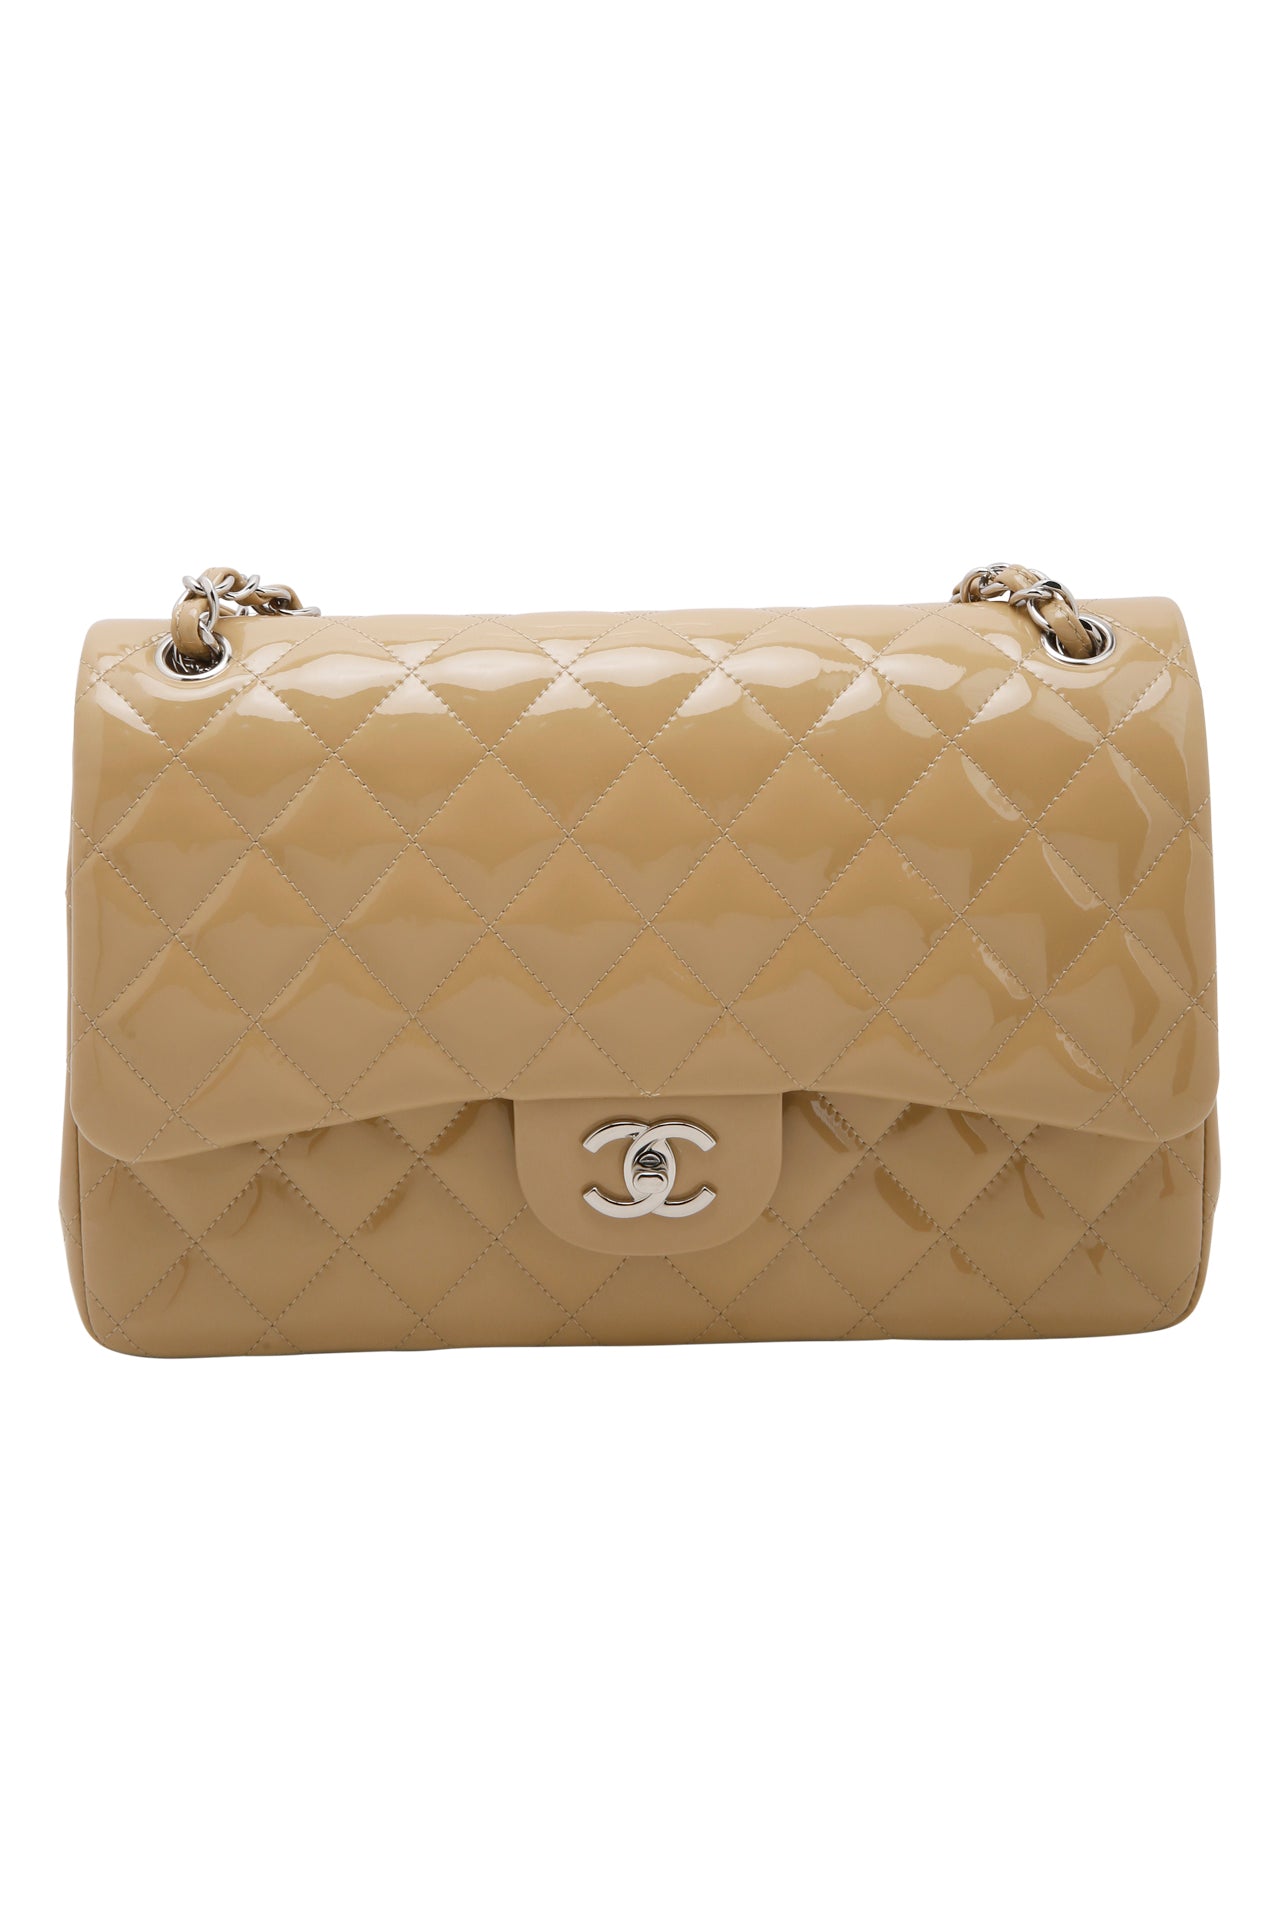 Chanel Jumbo Quilted Patent Leather Double Flap Beige